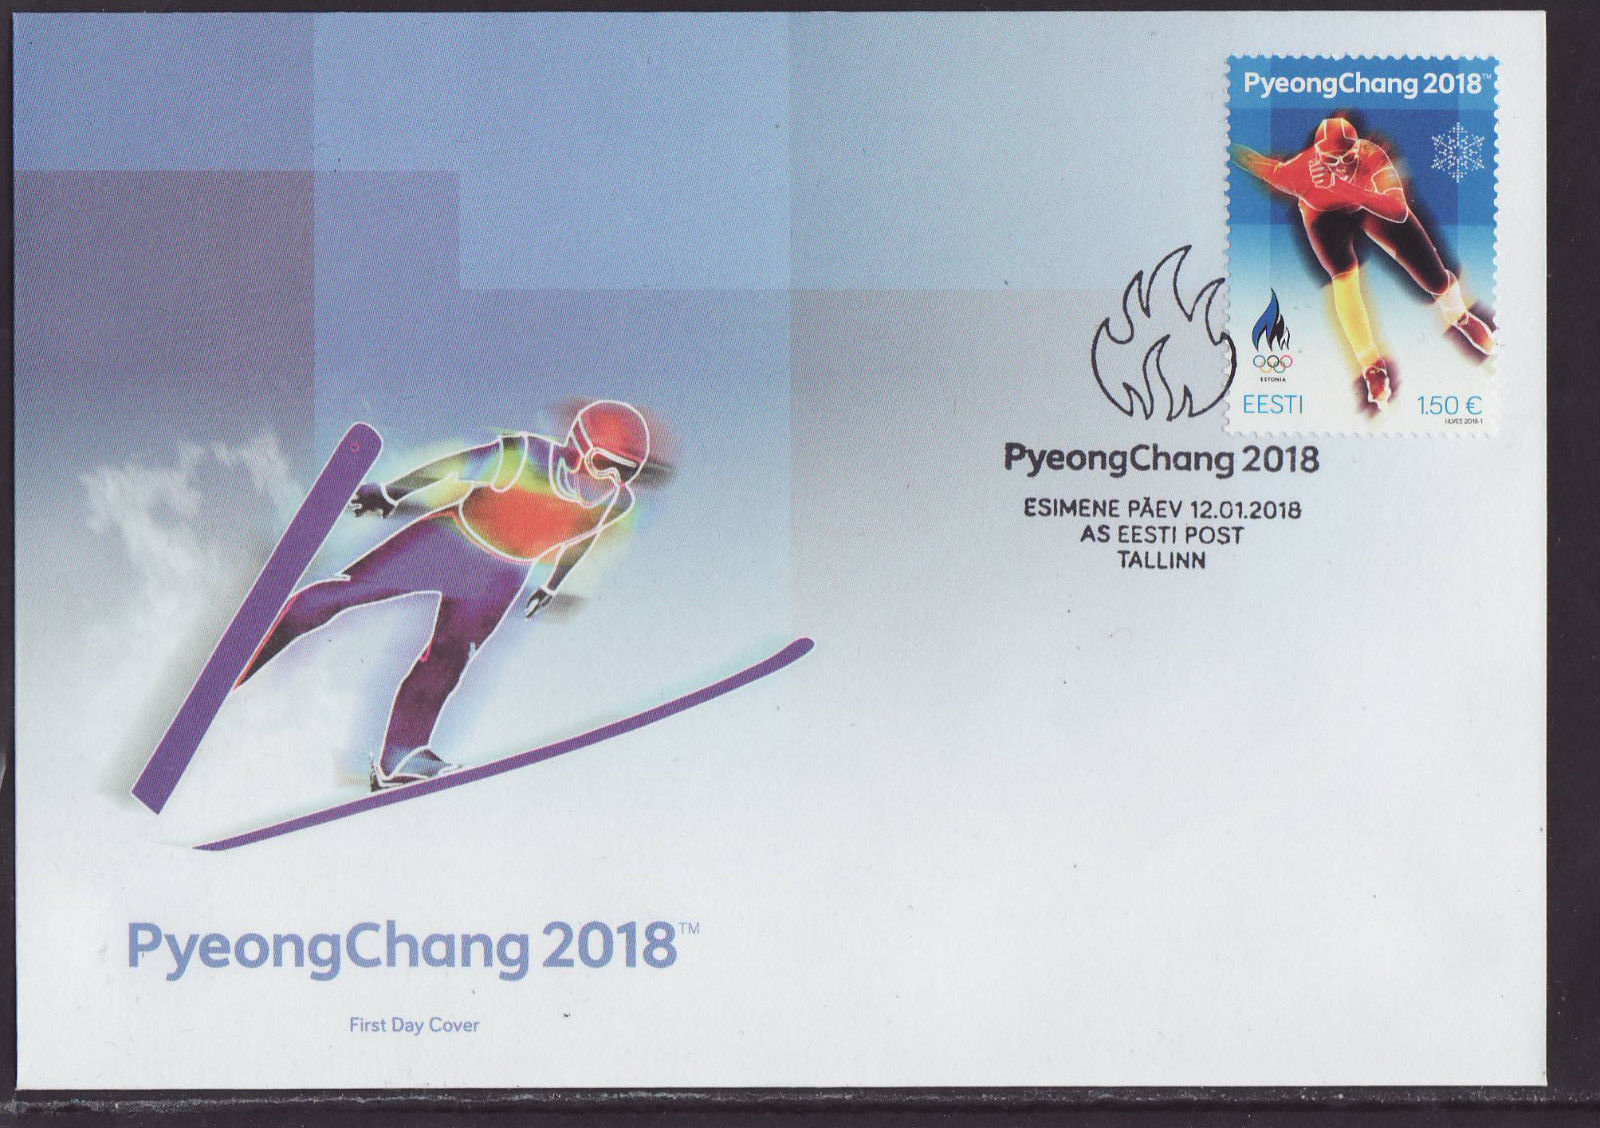 Estonia - 2018 Winter Olympics, released January 12, 2018 [first day cover]